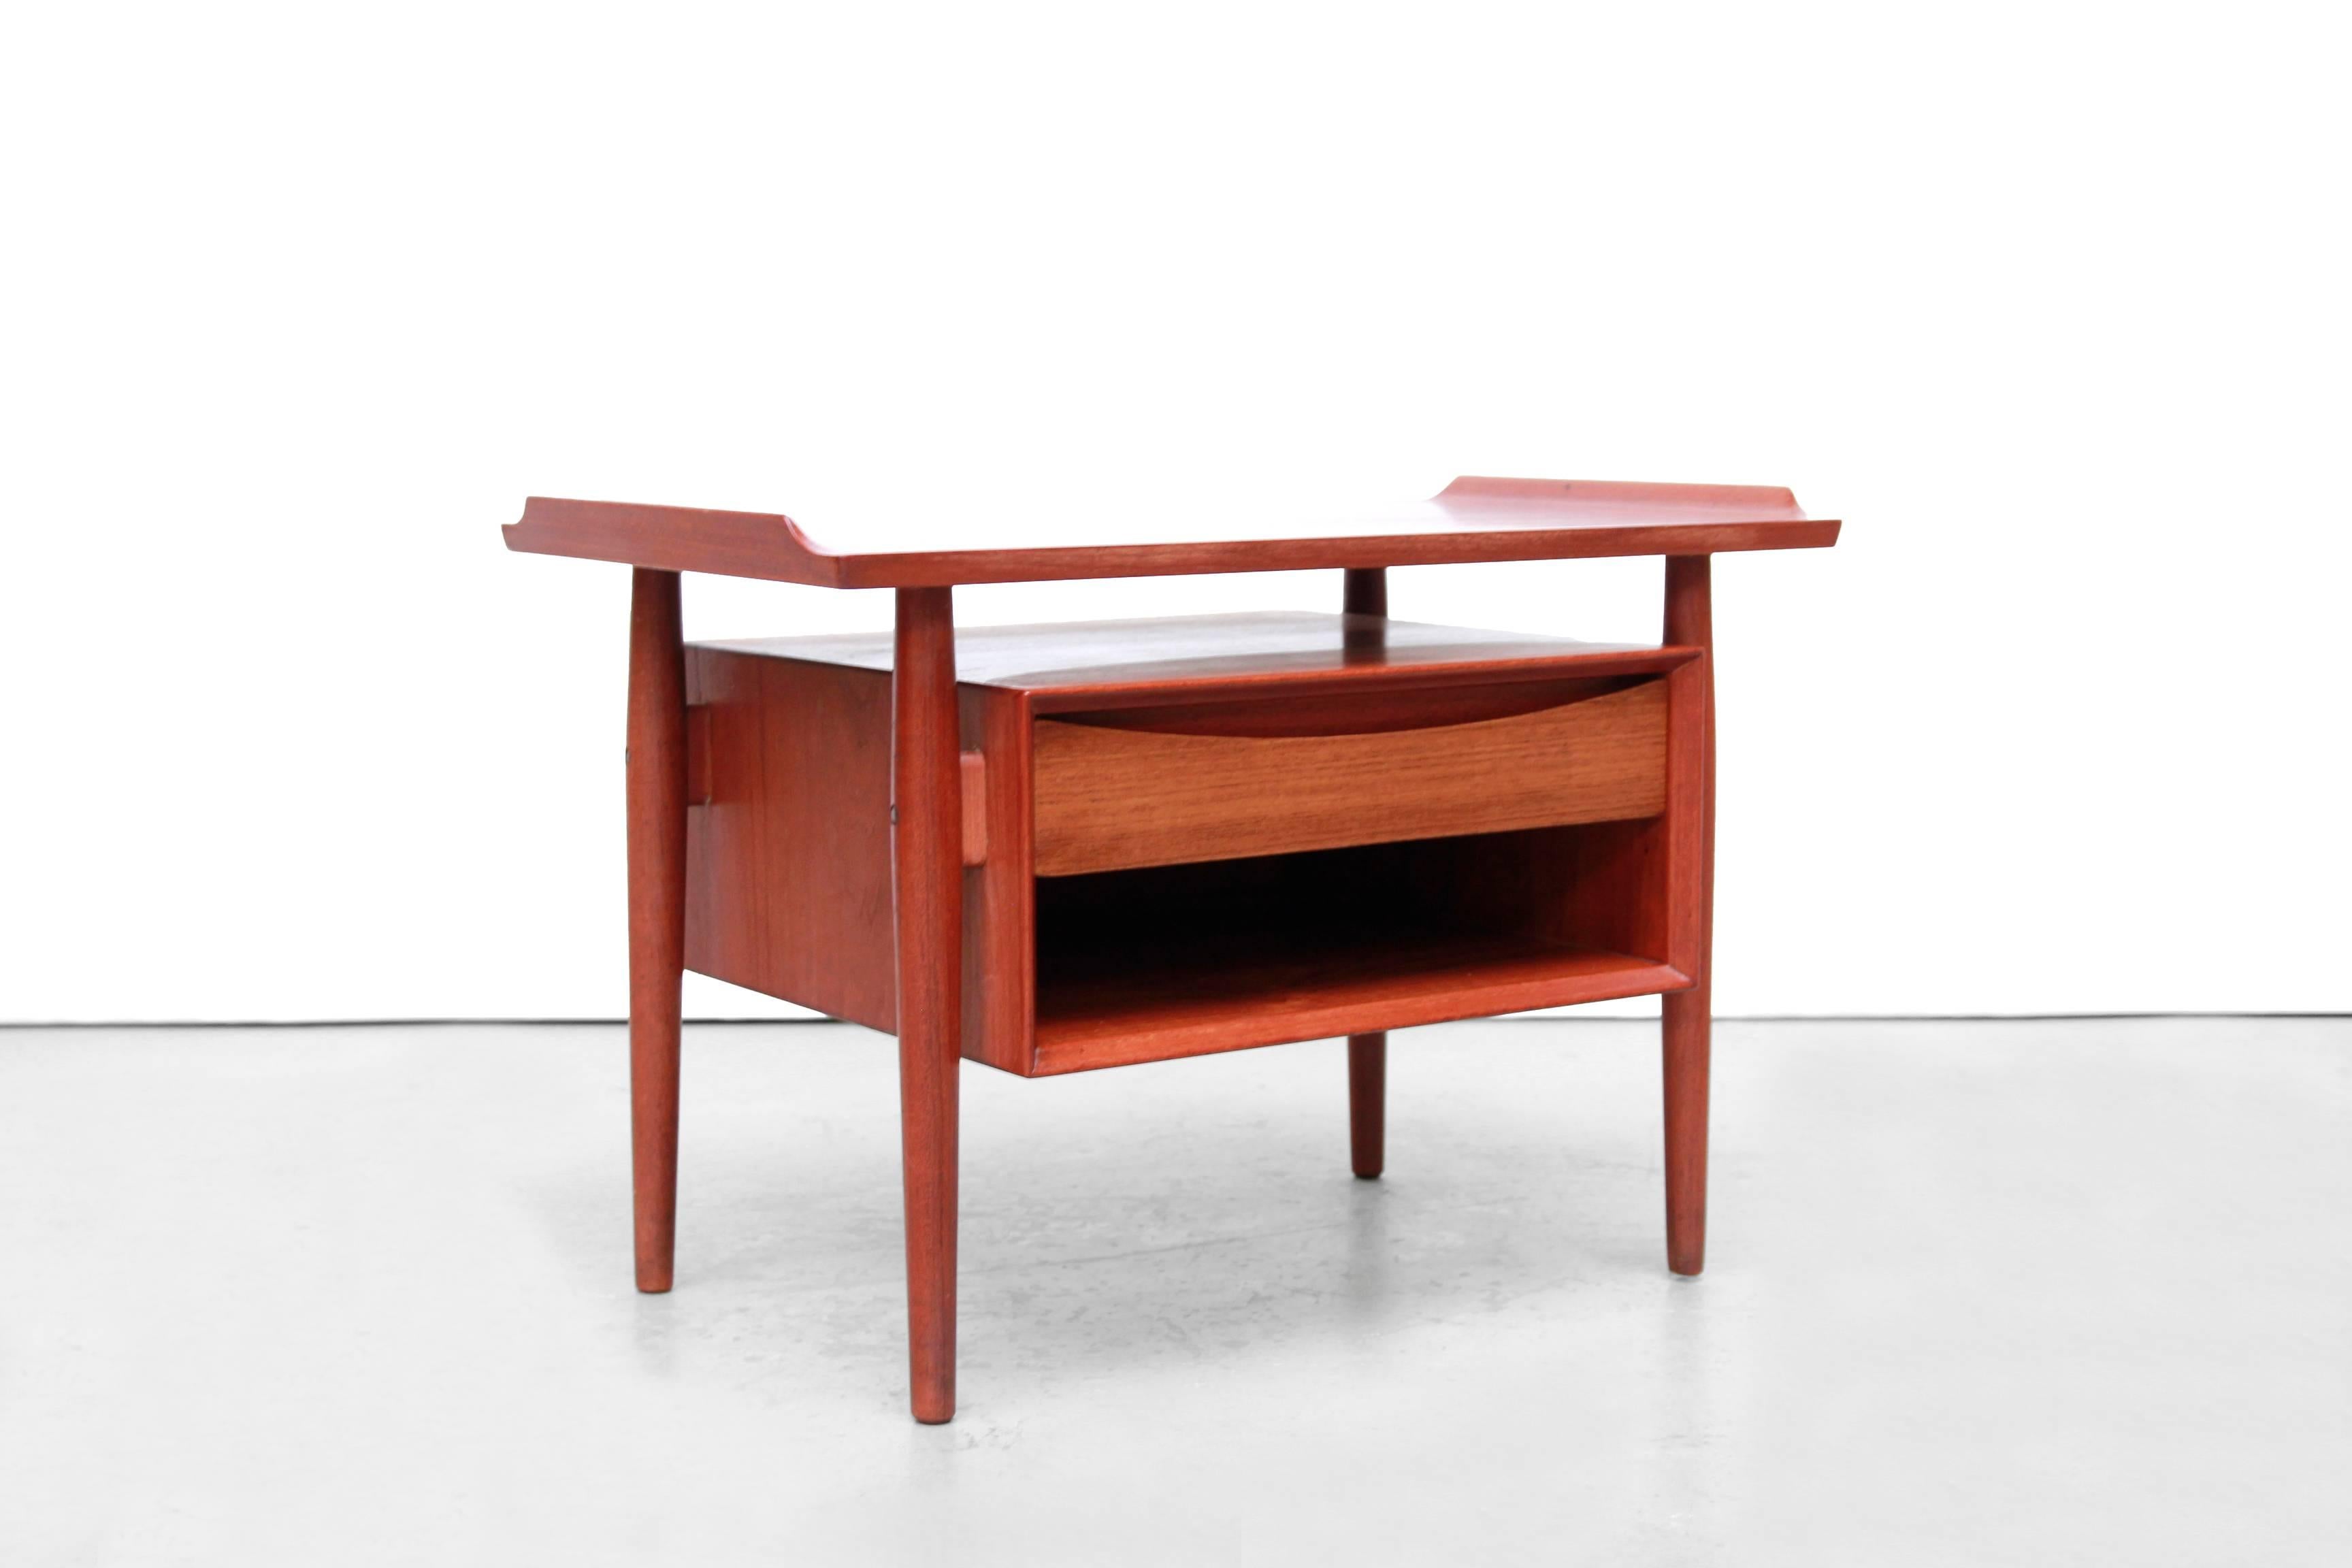 Beautiful side table with iconic drawer designed by famous Danish designer Arne Vodder for Sibast Mobler Denmark in the 1950s. This table with storage space can also be used as a hallway table with a mirror above or as a bedside table. This piece of